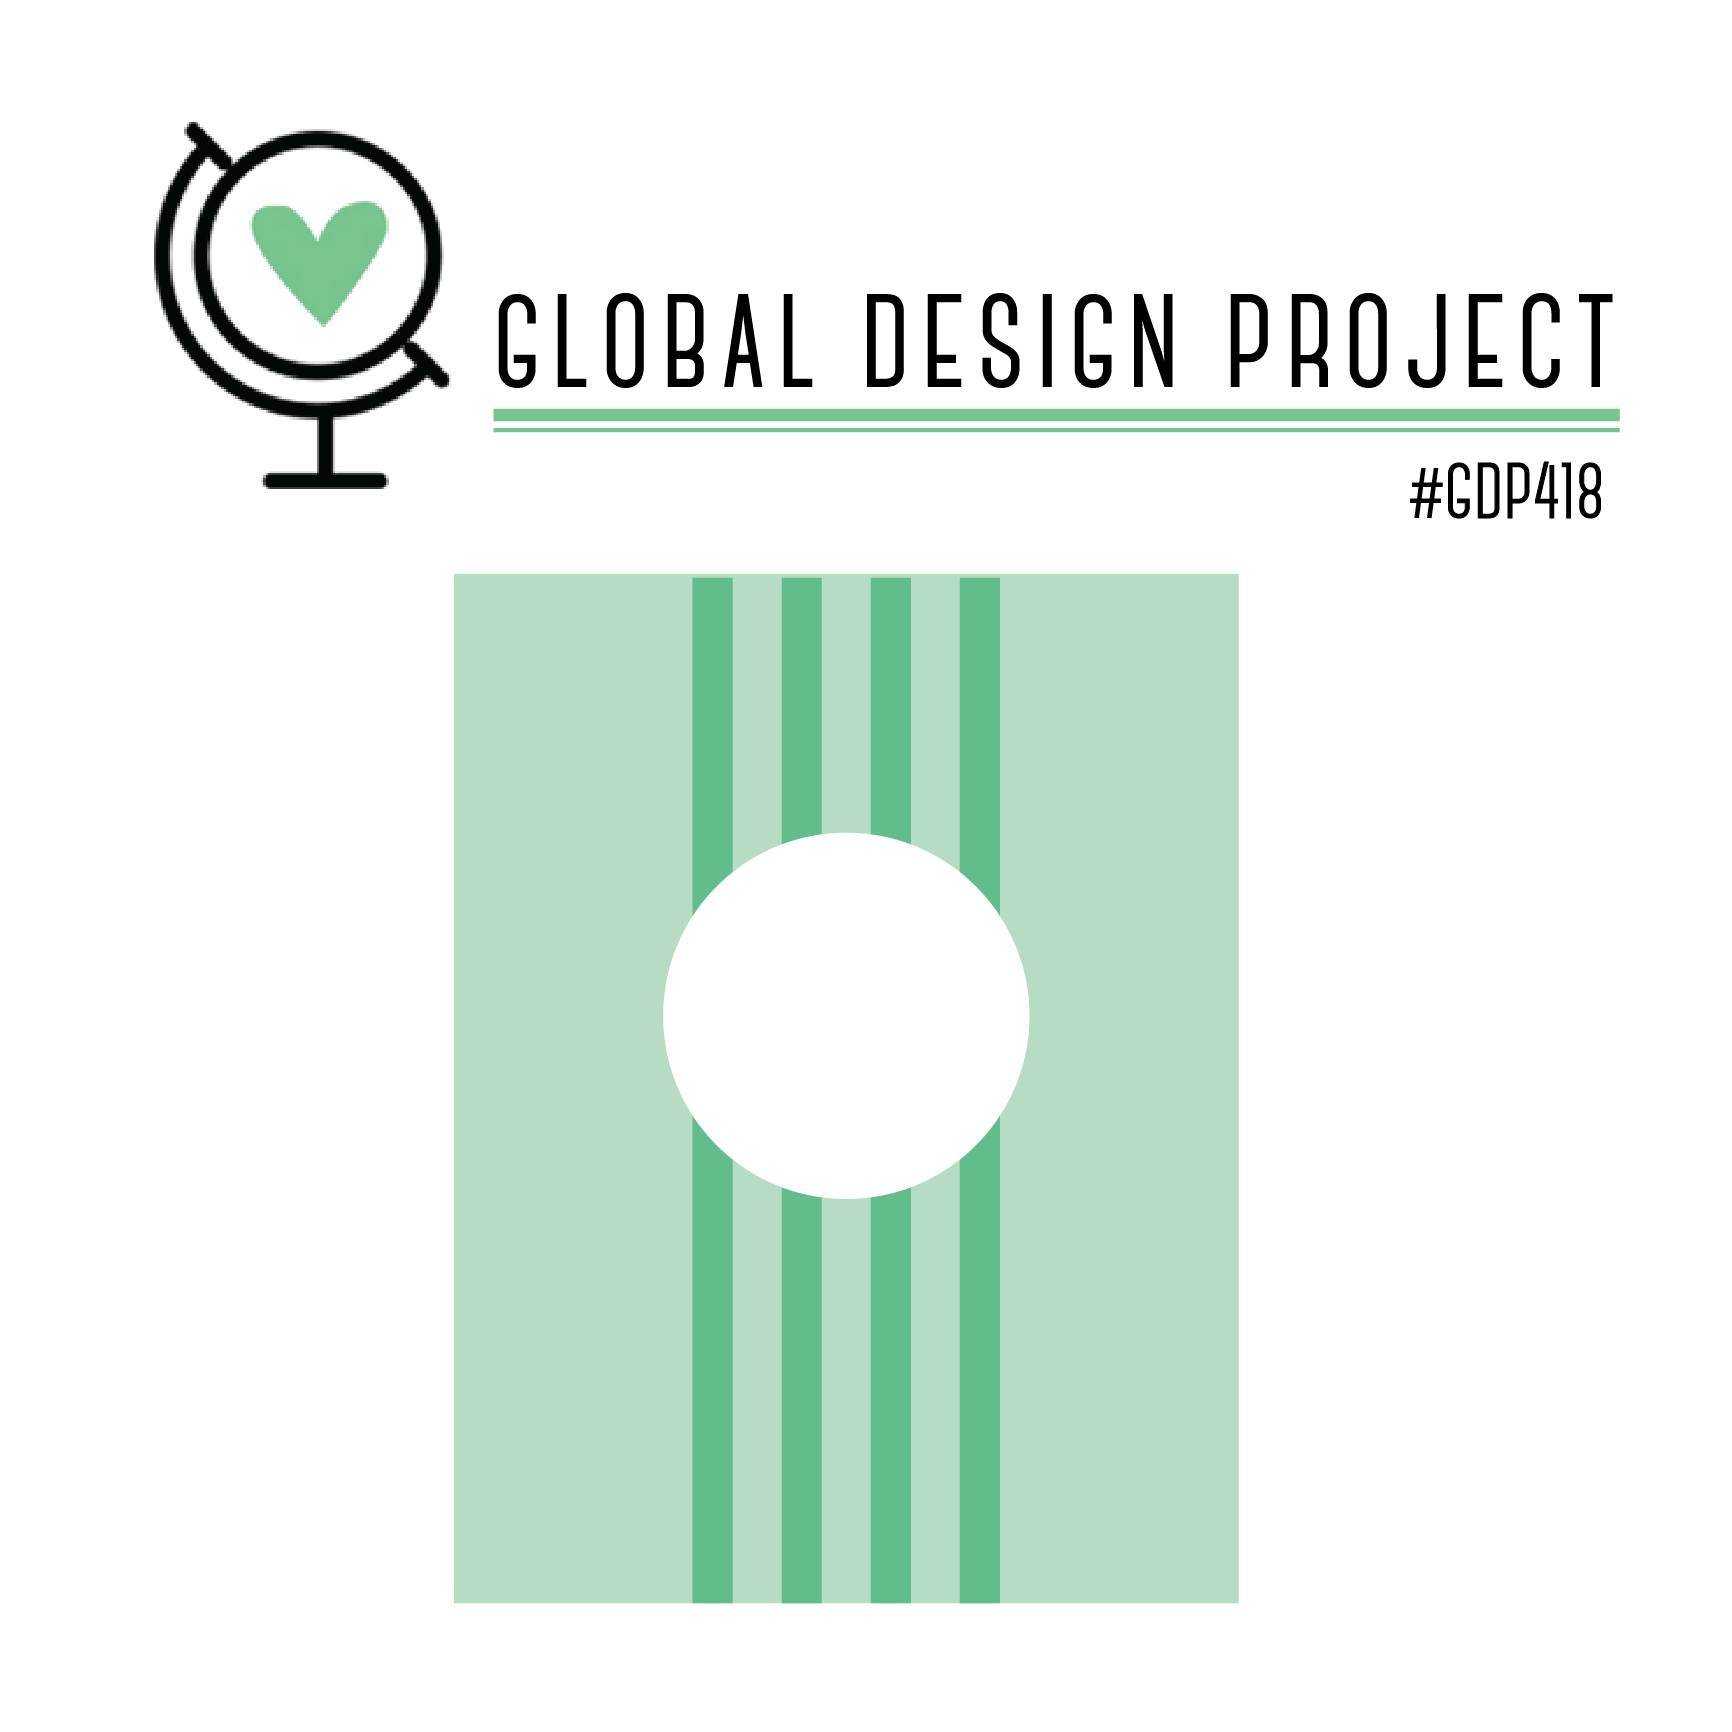 #GDP418 Global Design Project sketch challenge that I have based my card on this week using the Sea Turtles stamp as my focus product using Gilded Leafing as my product focus.